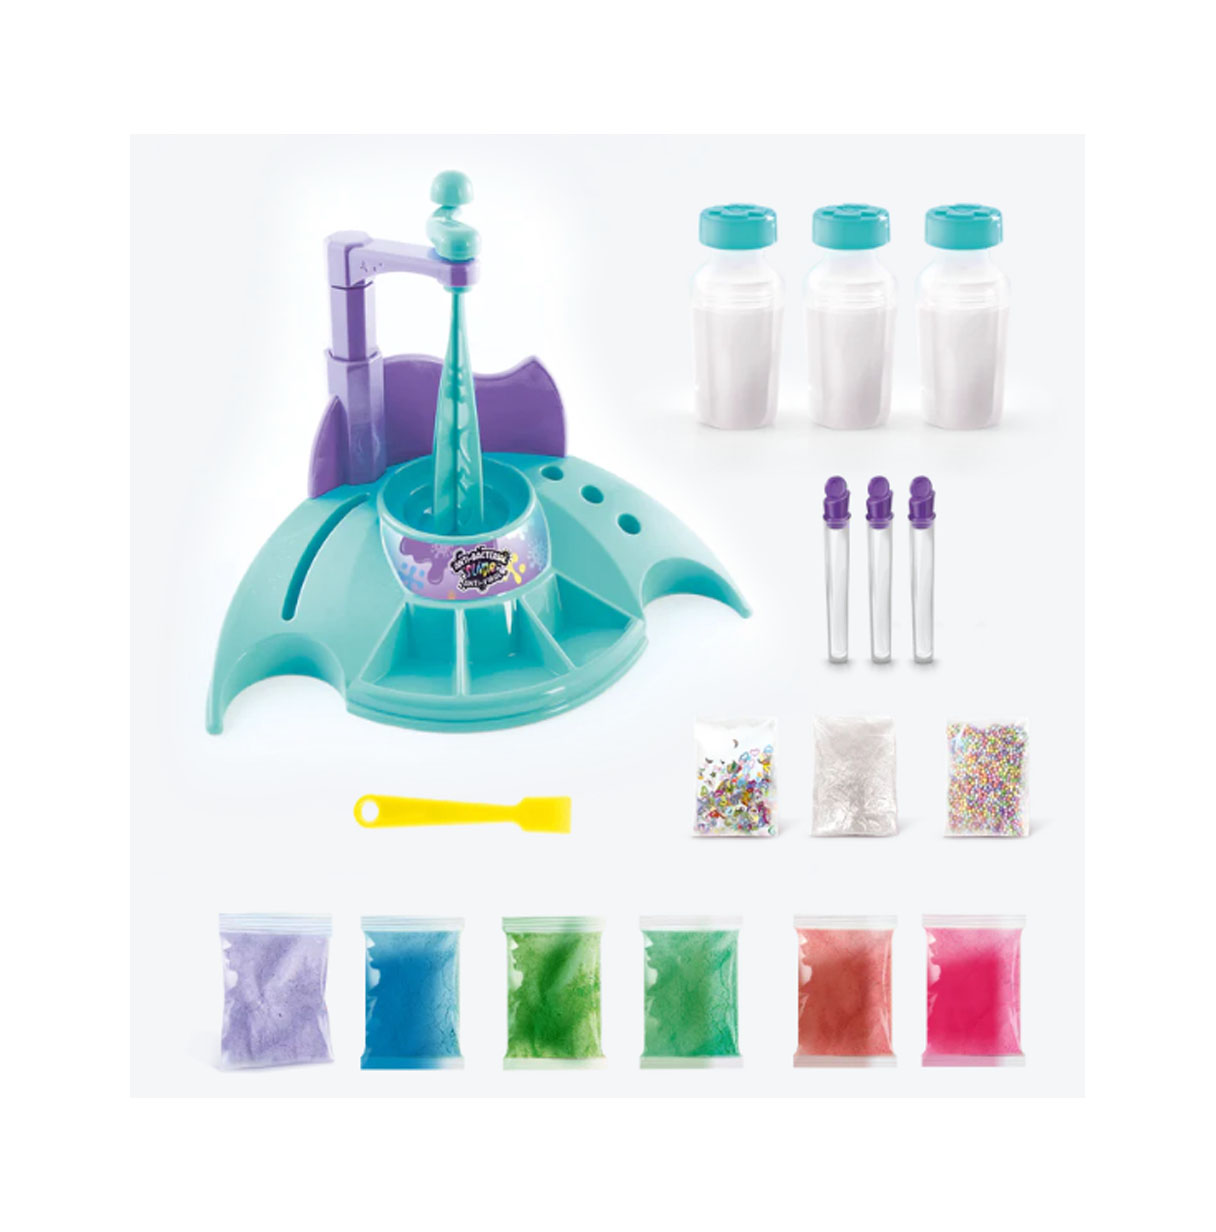 anti-bacterial slime laboratorio( canal toys- dsm012)